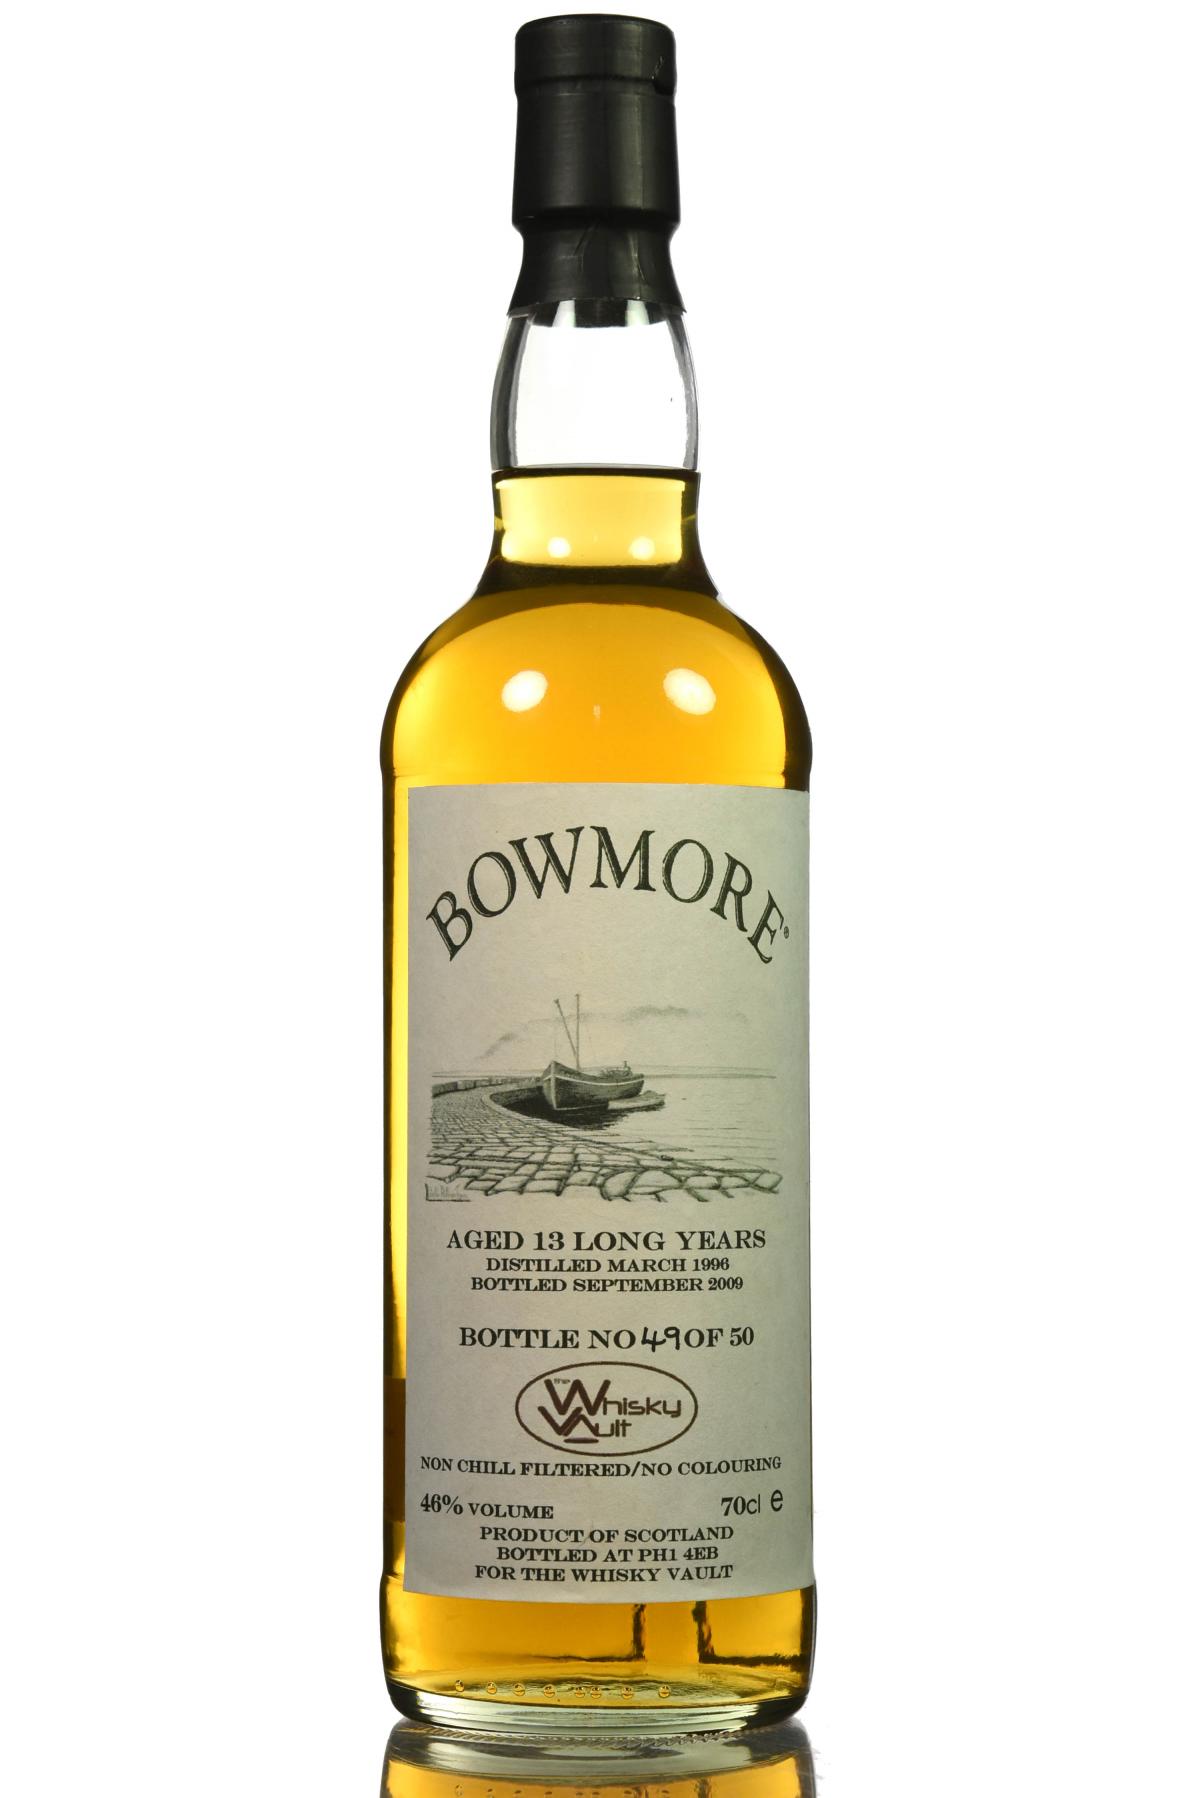 Bowmore 1996-2009 - 13 Year Old